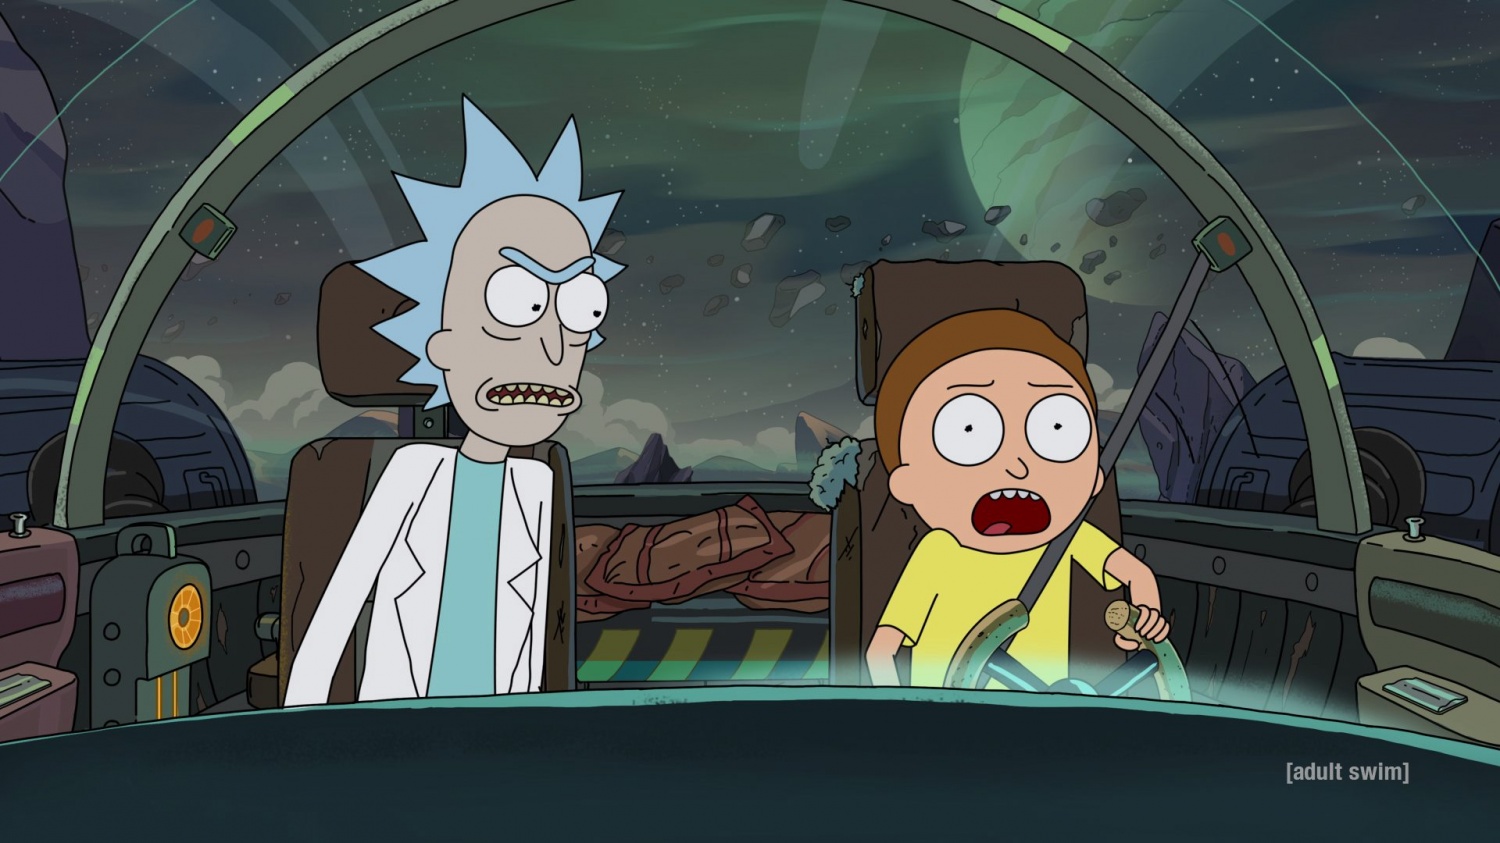 In just a few episodes, Rick and Morty's fourth season already made some character development on one of the two main characters.